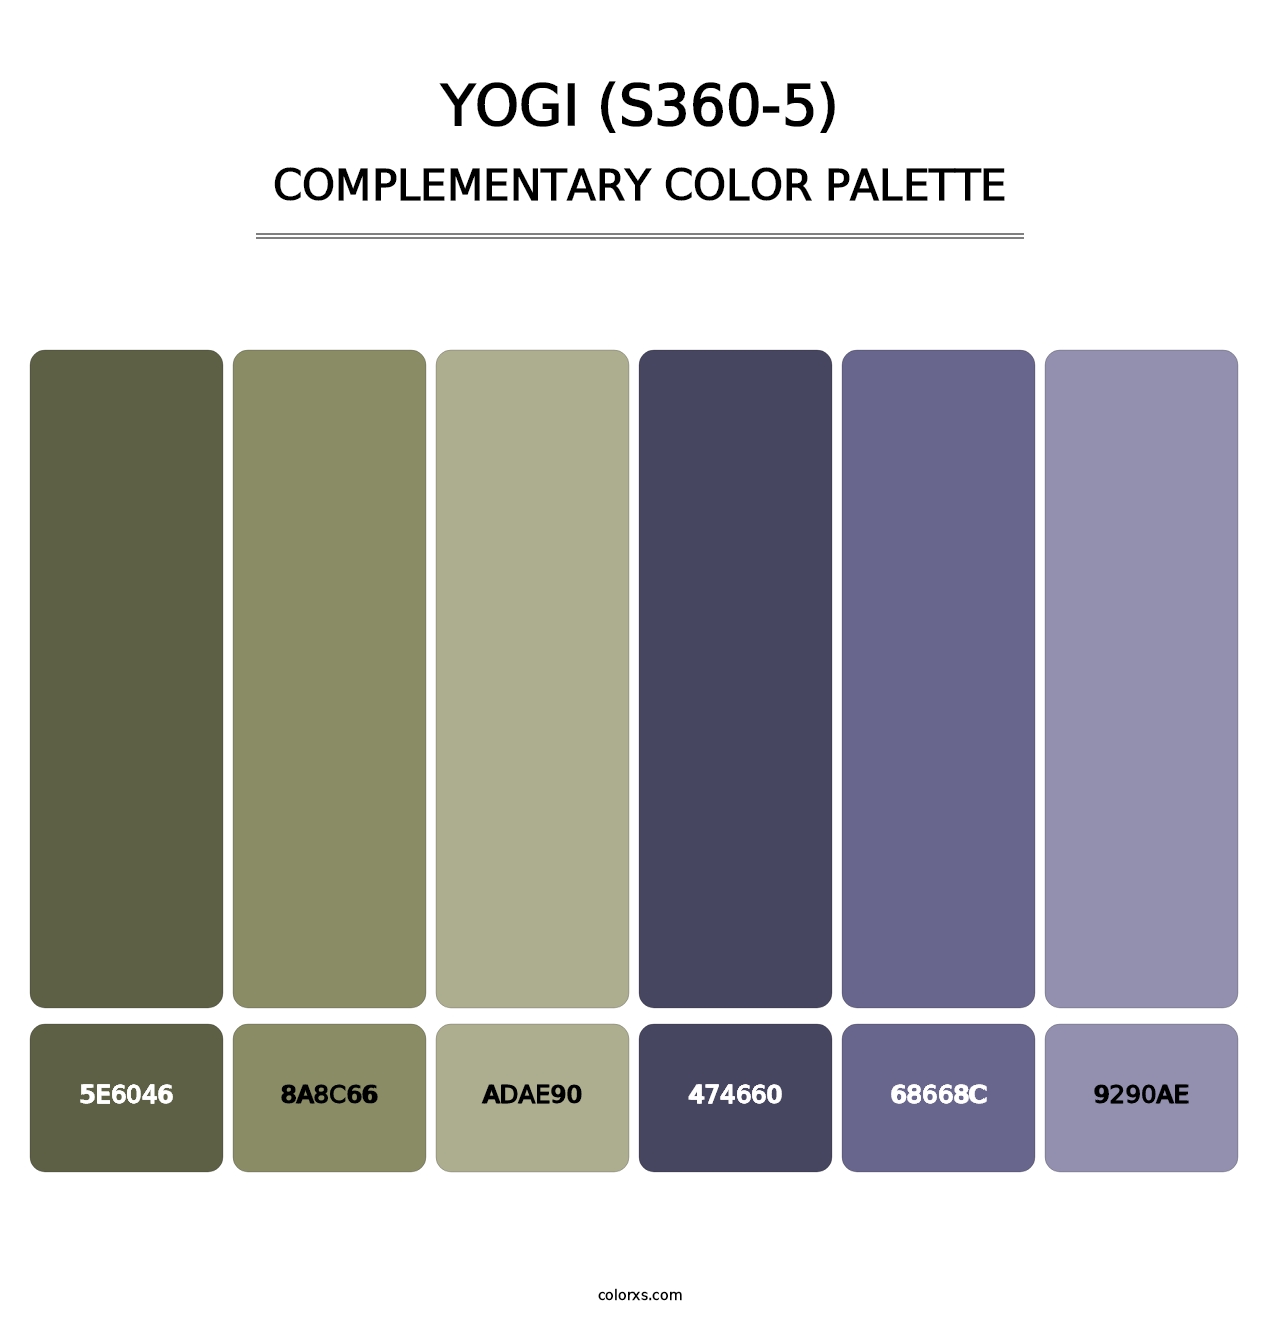 Yogi (S360-5) - Complementary Color Palette